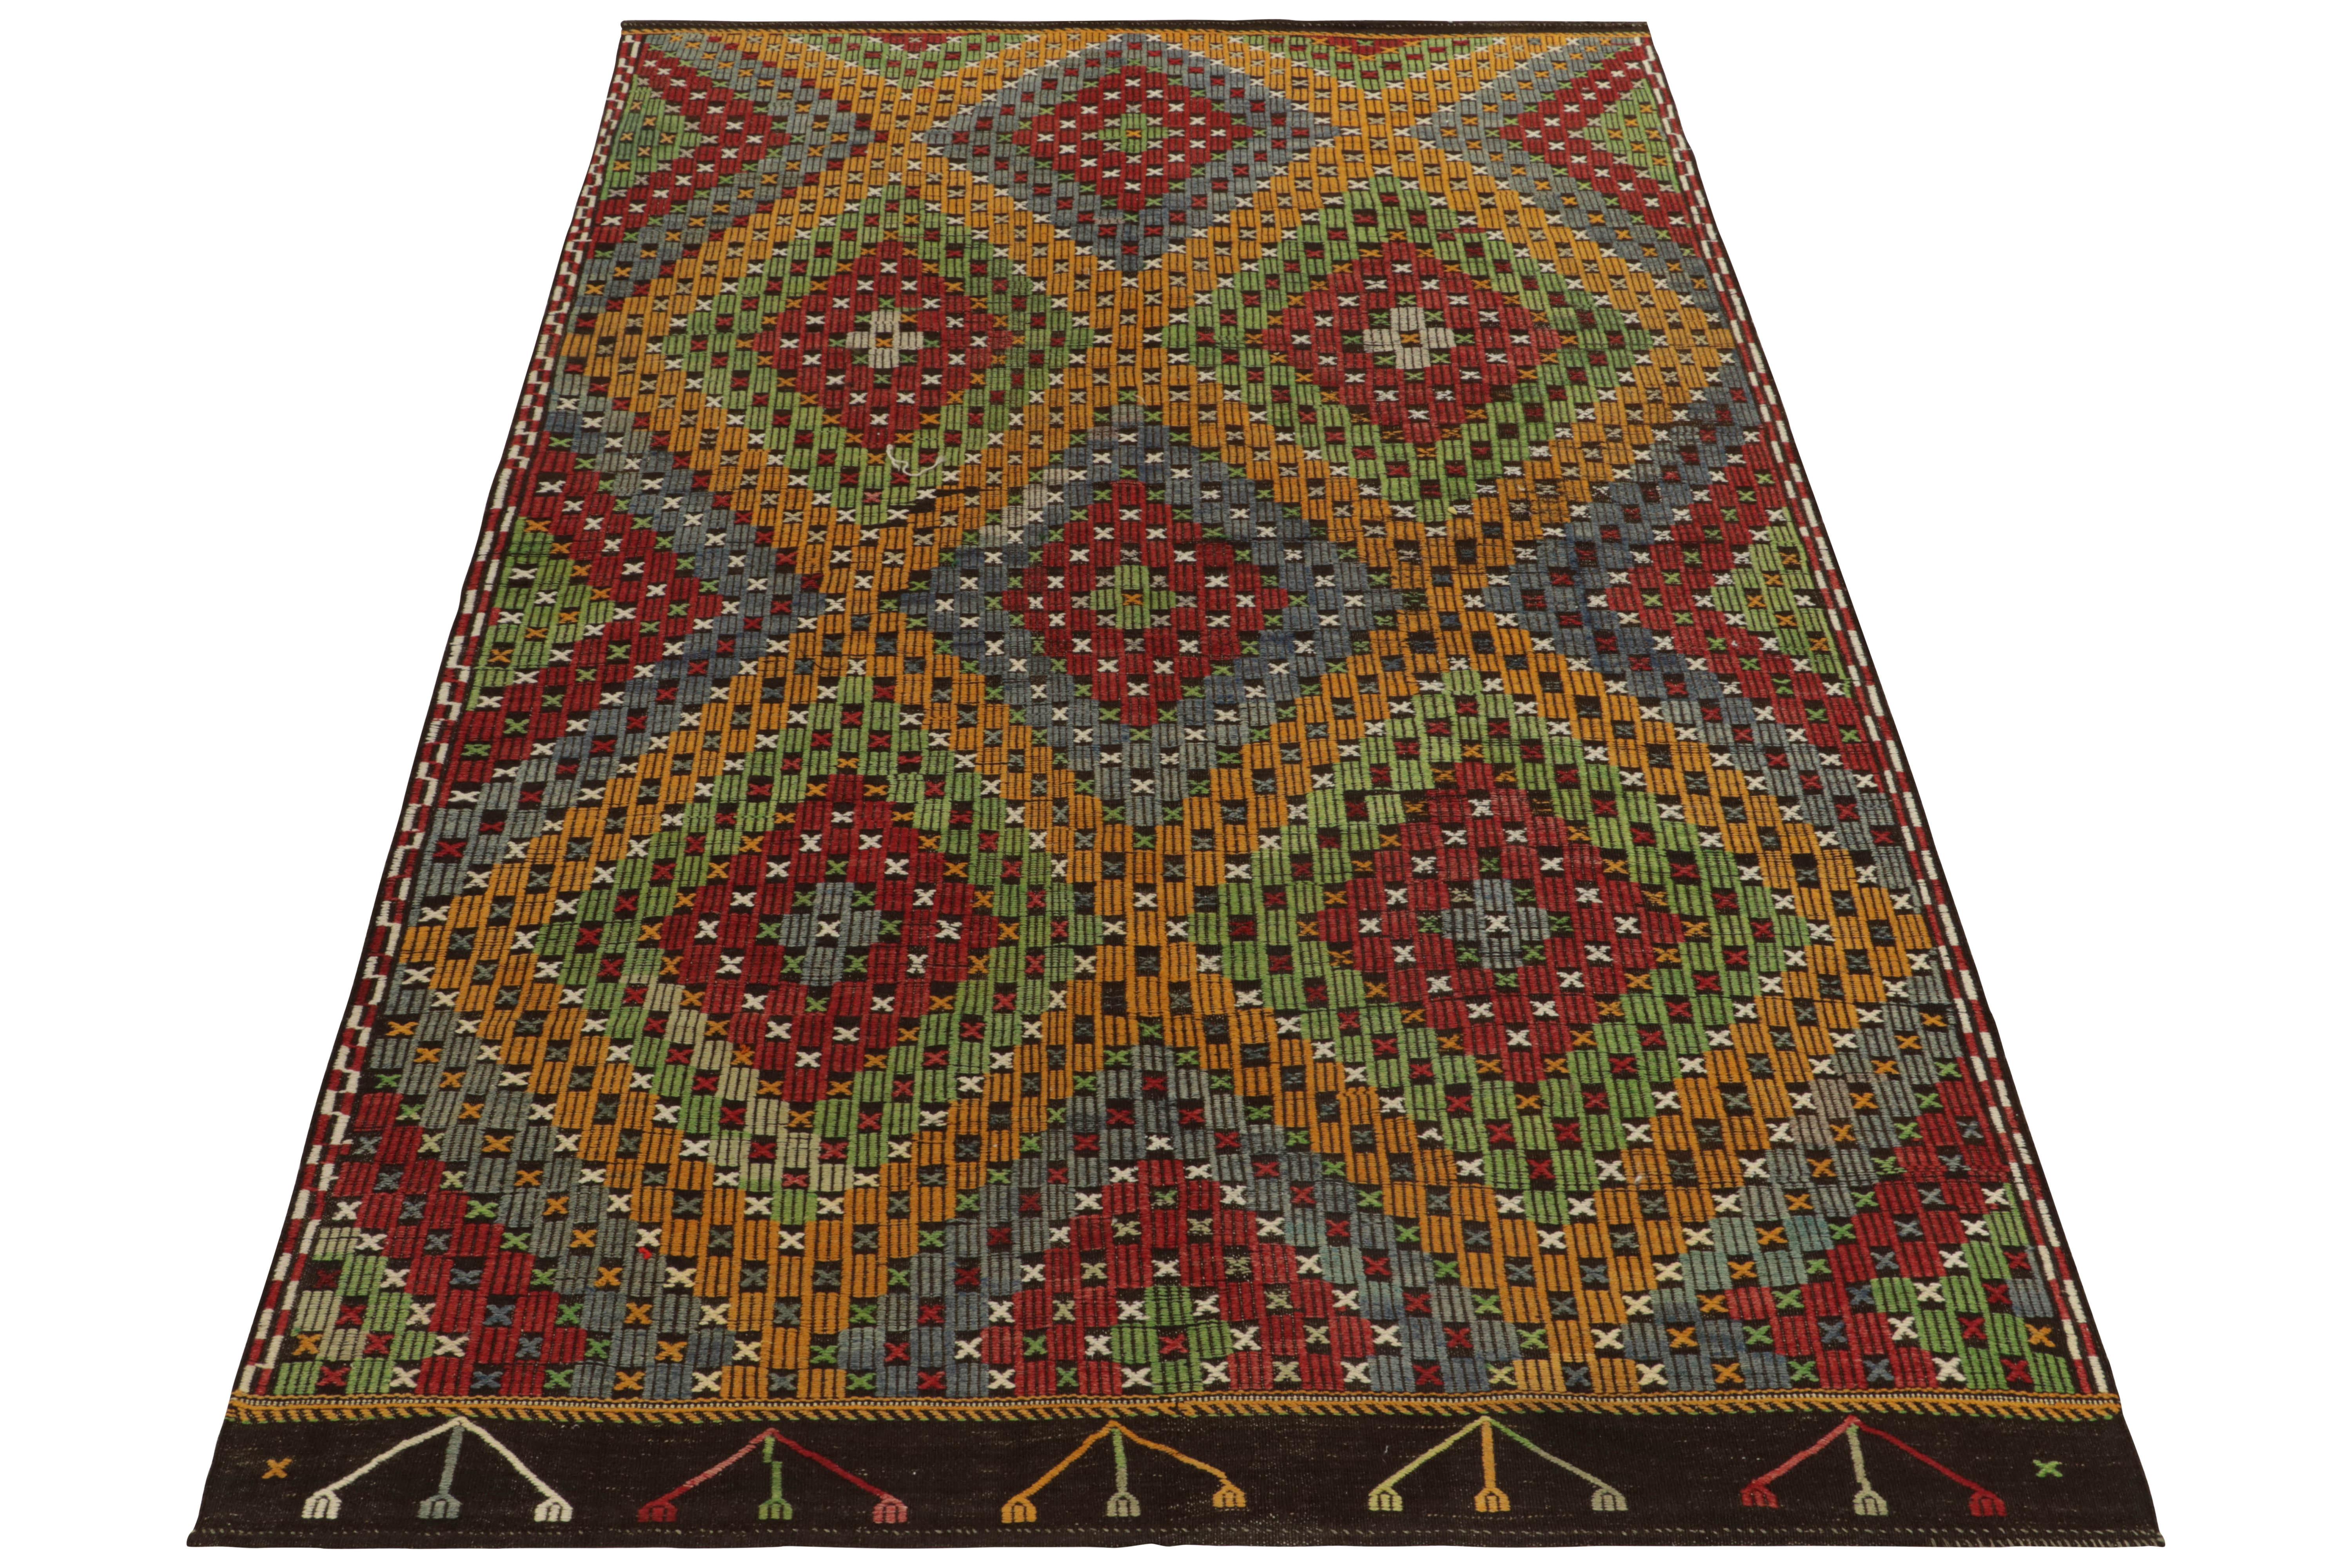 Connoting the celebrated Kurdish style, this 7x10 Cecim kilim rug hails from a special new curation of flat weaves. This vintage mid-century flatweave from Turkey features an embroidered diamond pattern alternating in tones of red, green, gold, blue